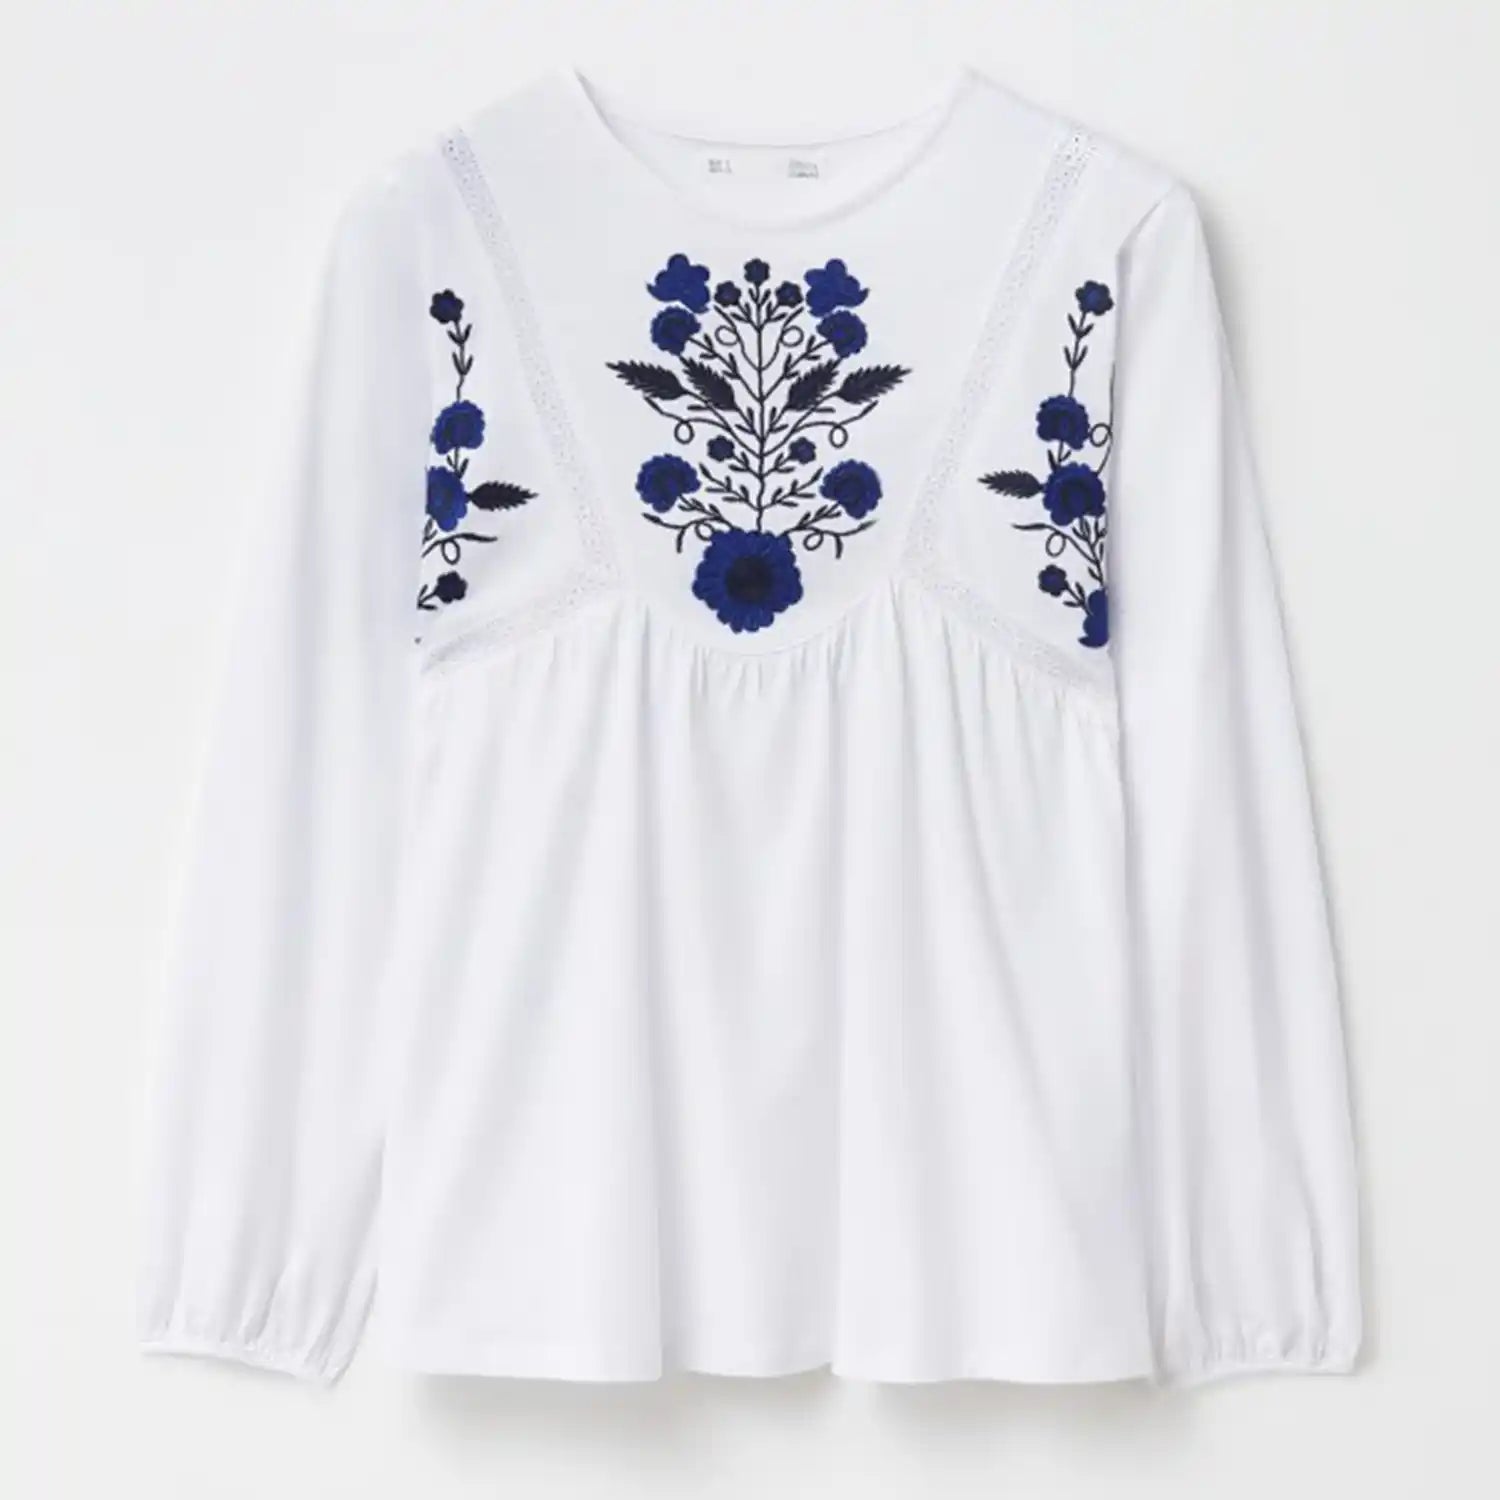 Embroidered top